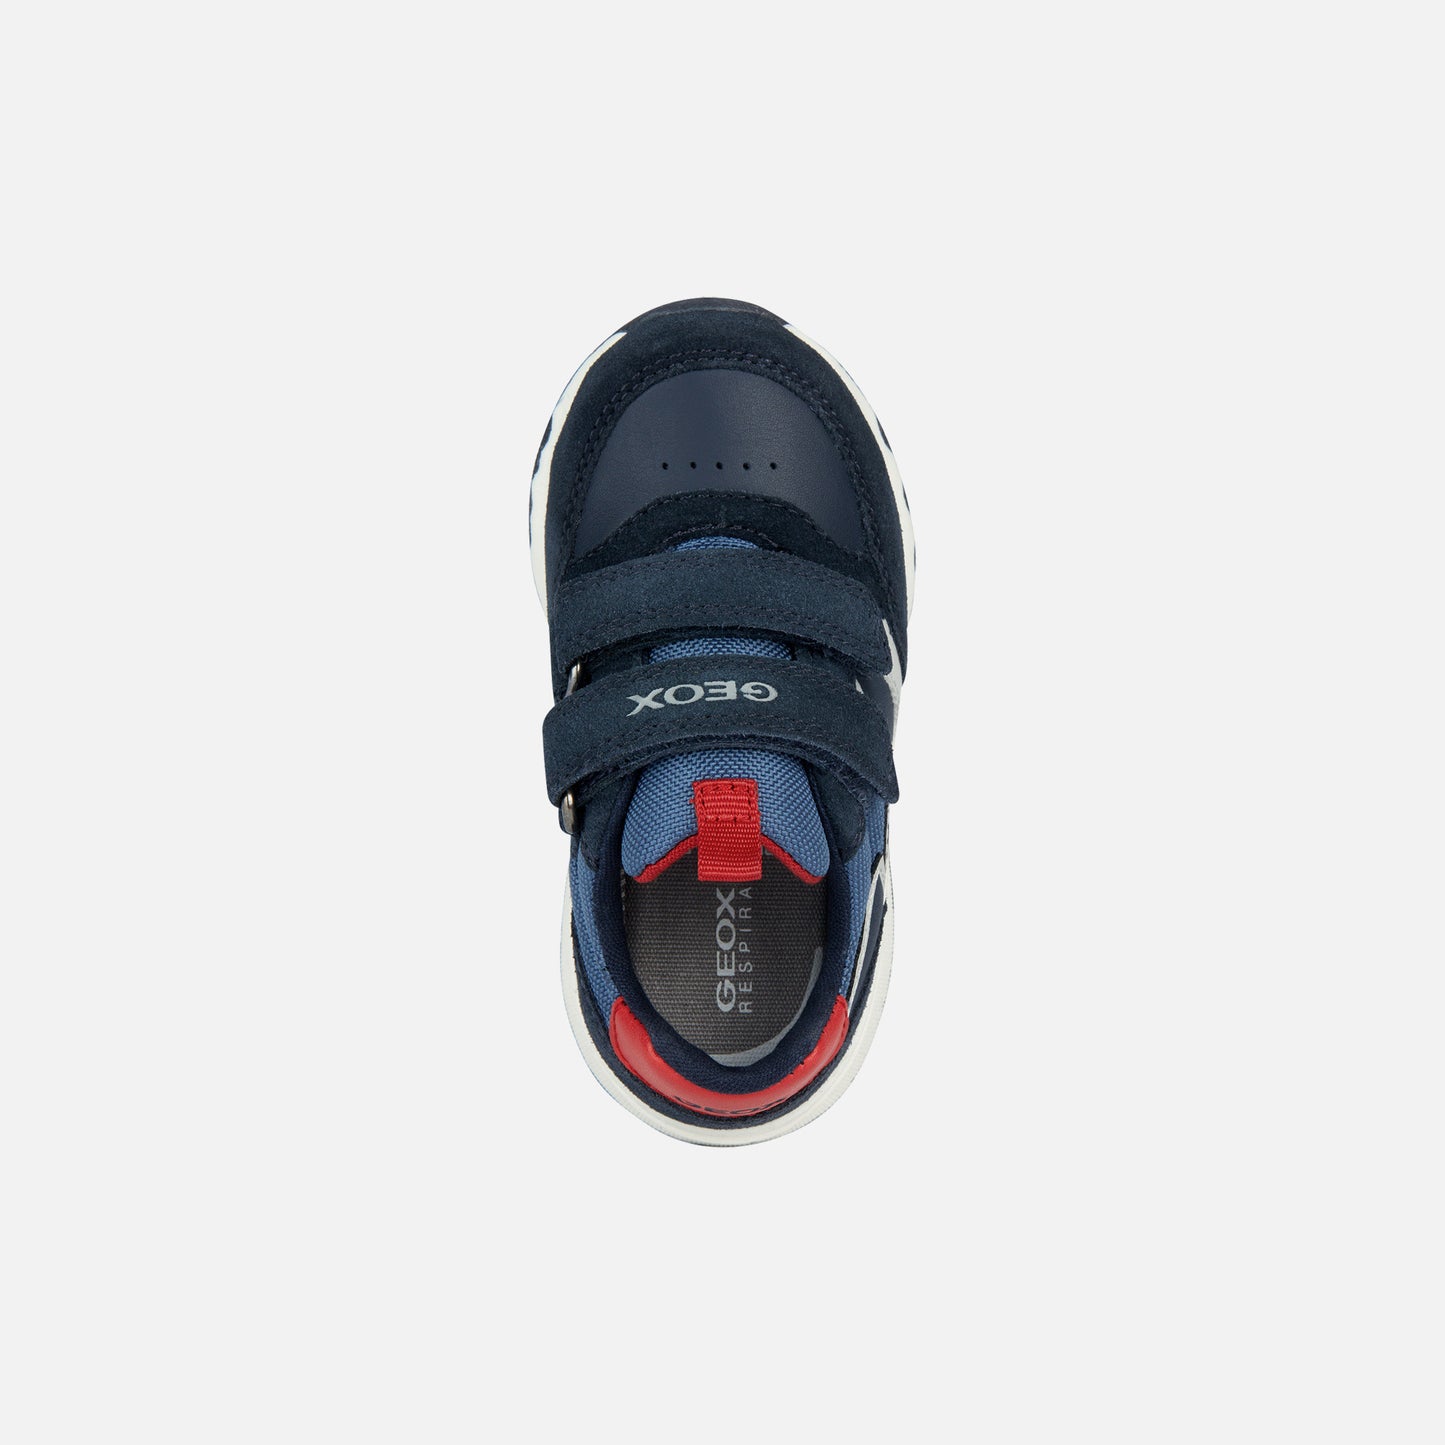 A casual sports trainer by Geox, style B Pyrip Boy, in navy suede/ other material with red heel and tab and light grey star outline on the side. Double velcro fastening. Above view.